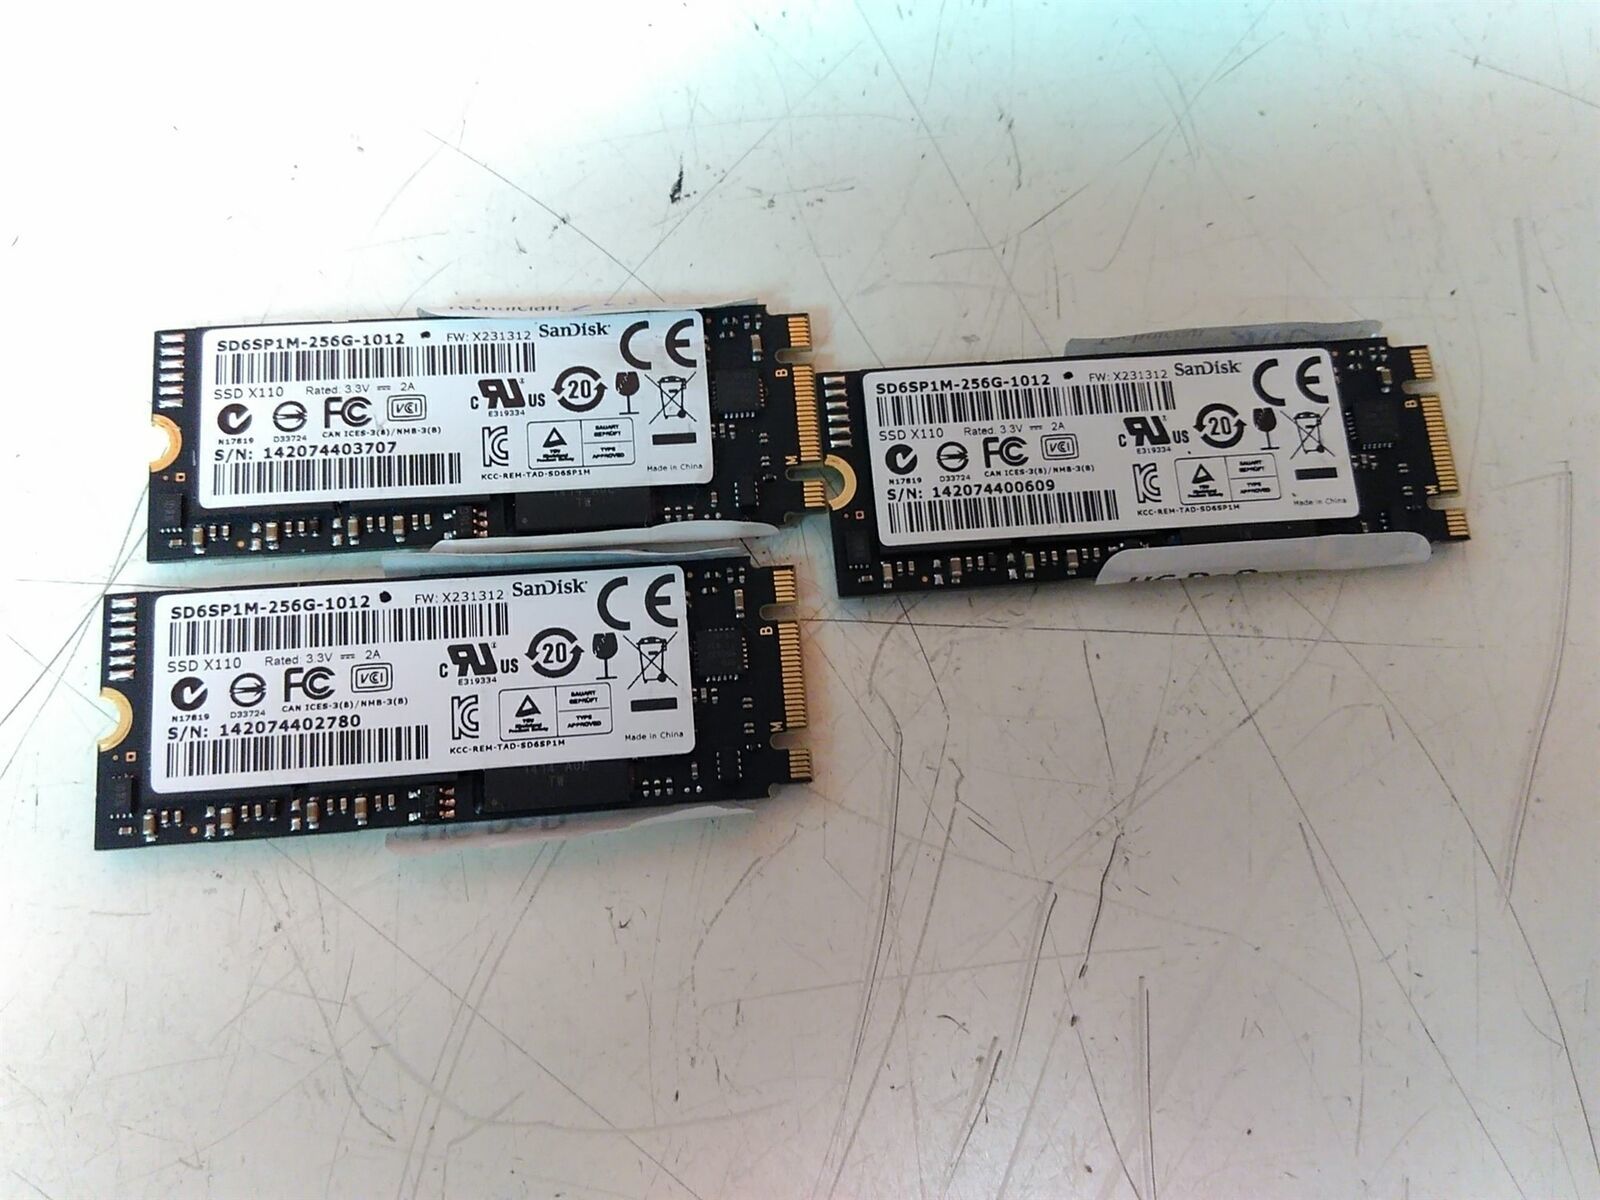 Lot of 3 Dell NNCRP SanDisk X110 SD6SP1M-256G-1012 256GB M.2 SATA Internal SSD - £63.10 GBP